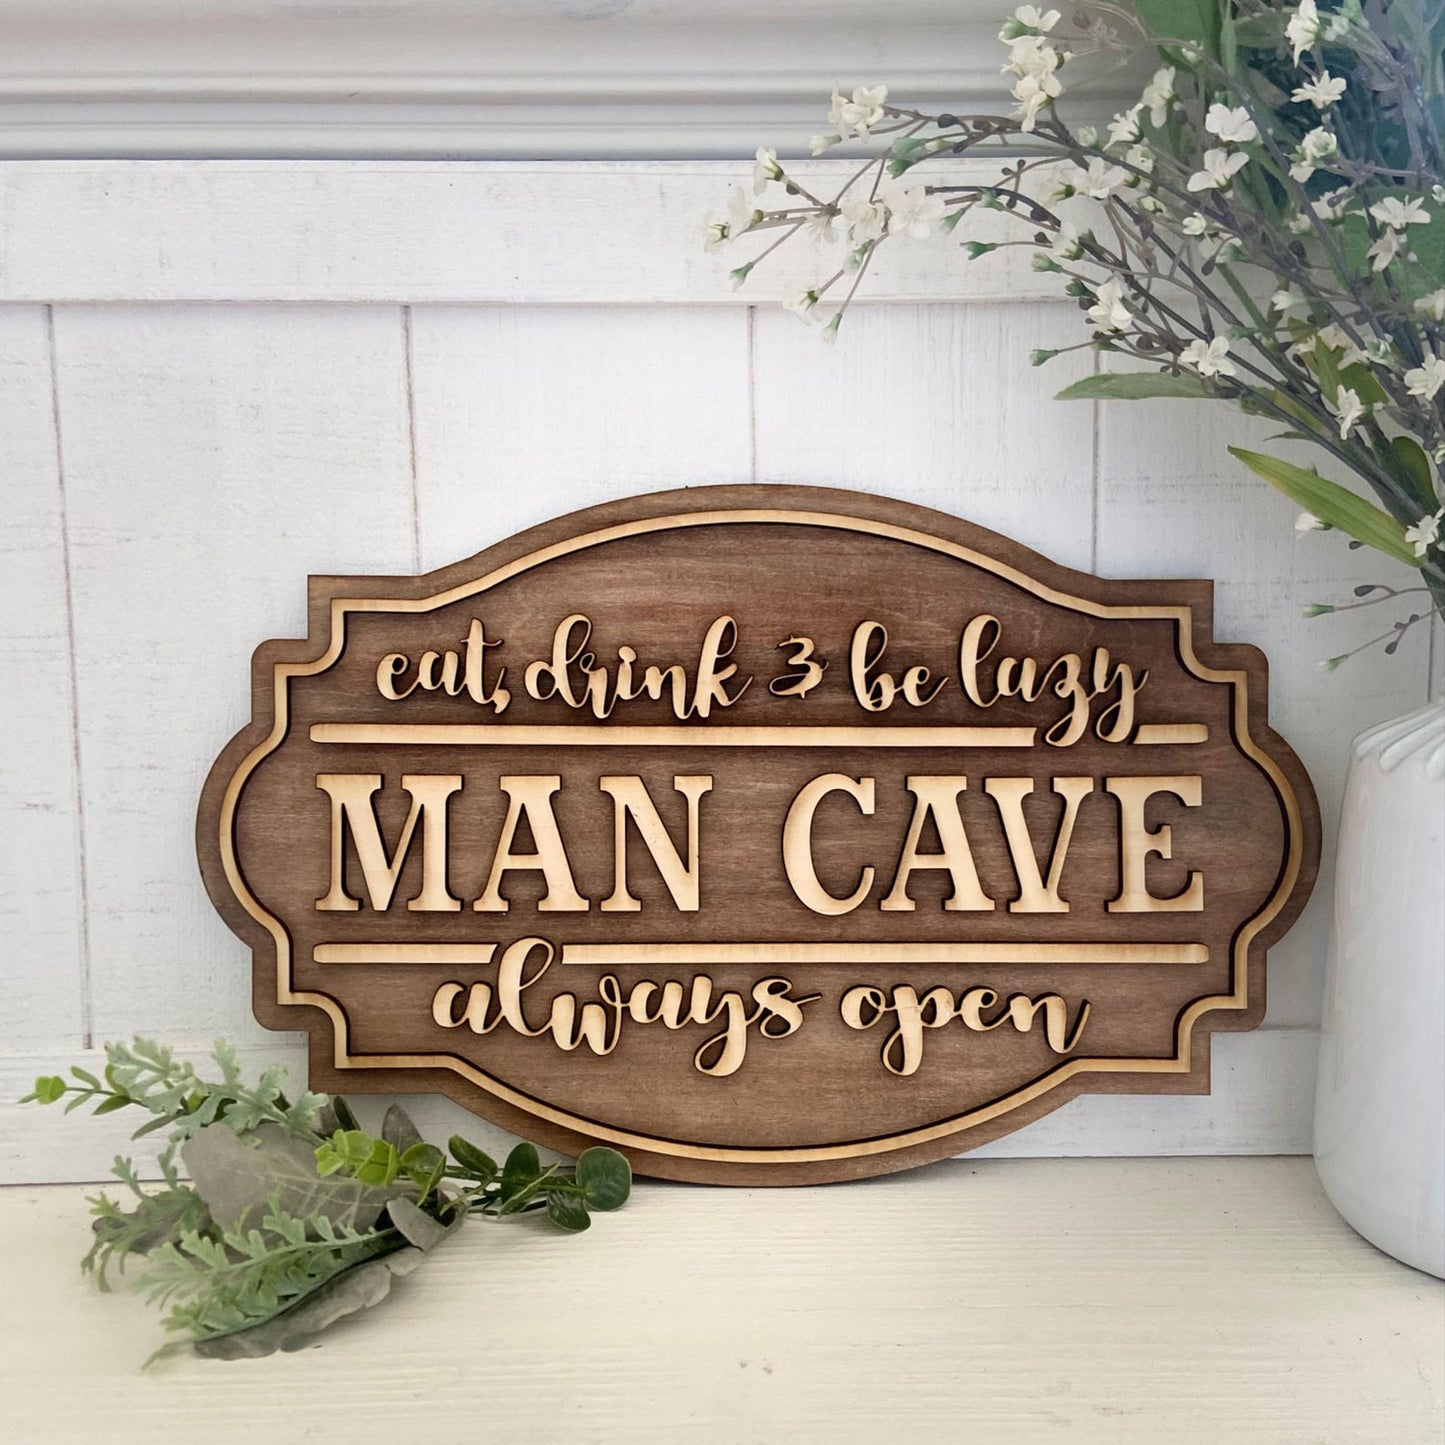 Man Cave Sign "Eat, Drink and Be Lazy"